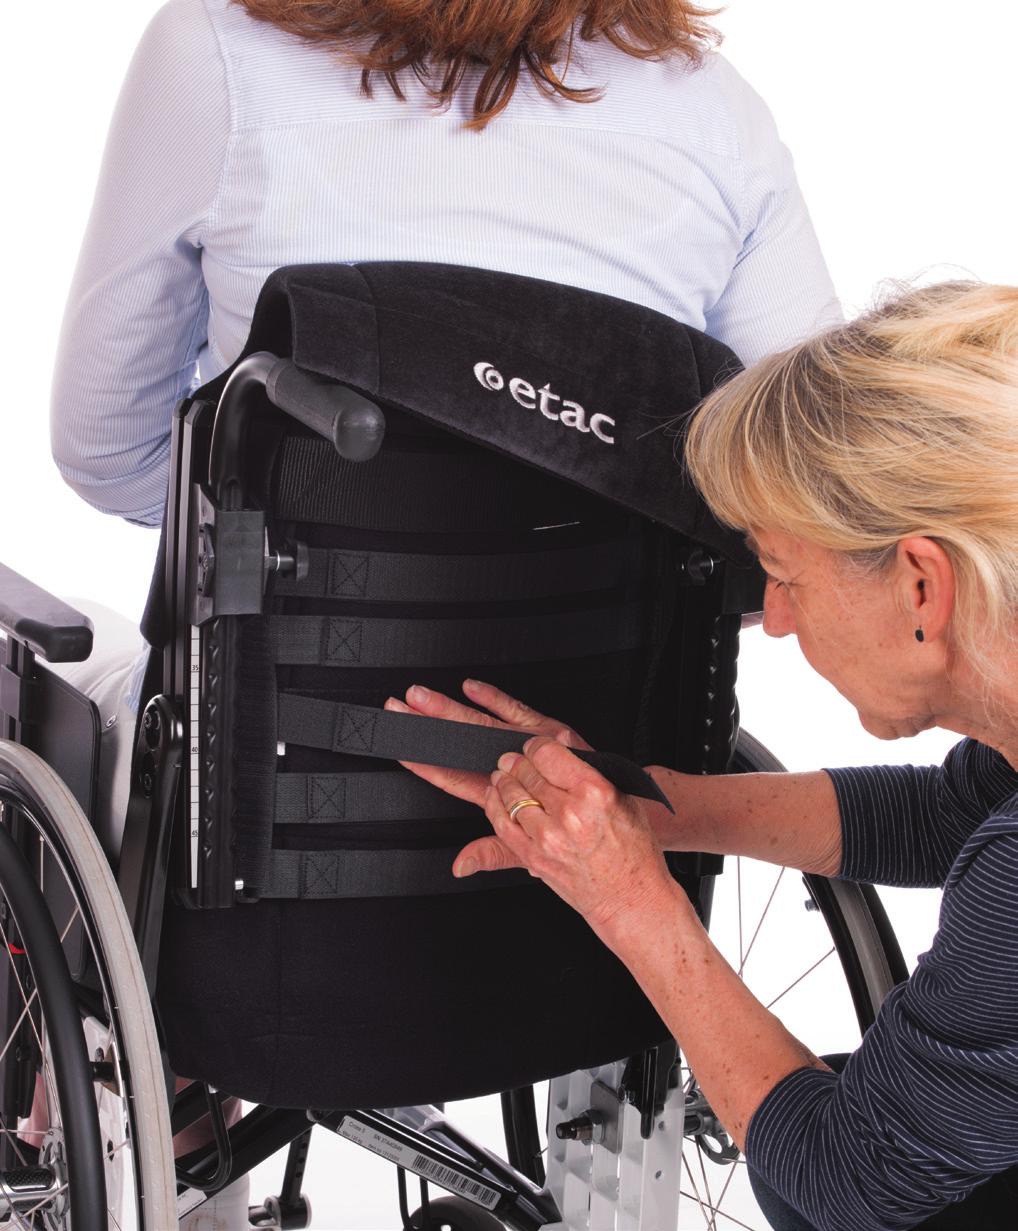 Etac Cross A back support Made to fulfill the toughest positioning targets of dedicated rehab professionals.